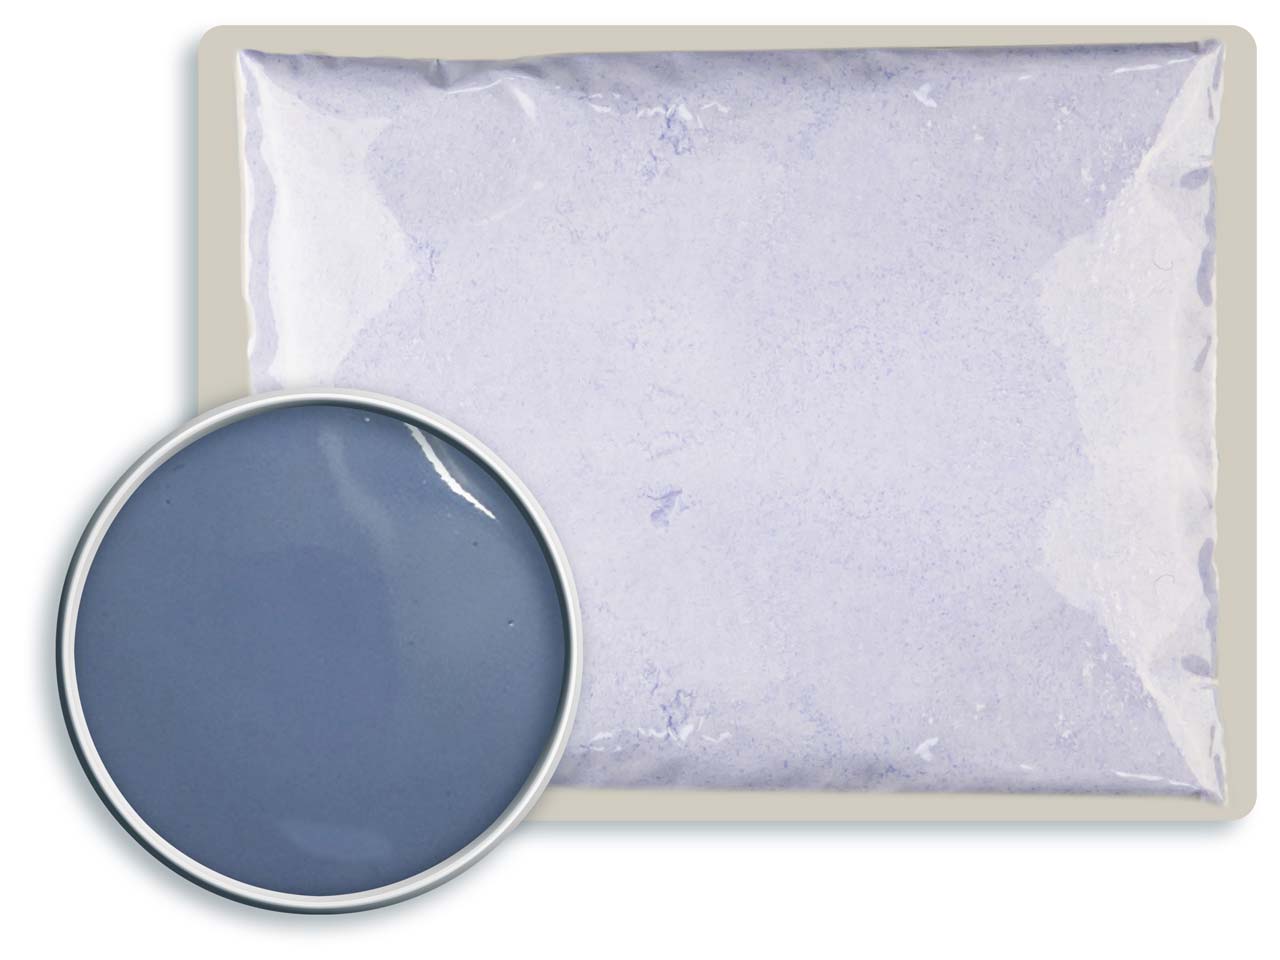 WG Ball Opaque Enamel Pastel Blue 8036 25g Lead Free Questions & Answers